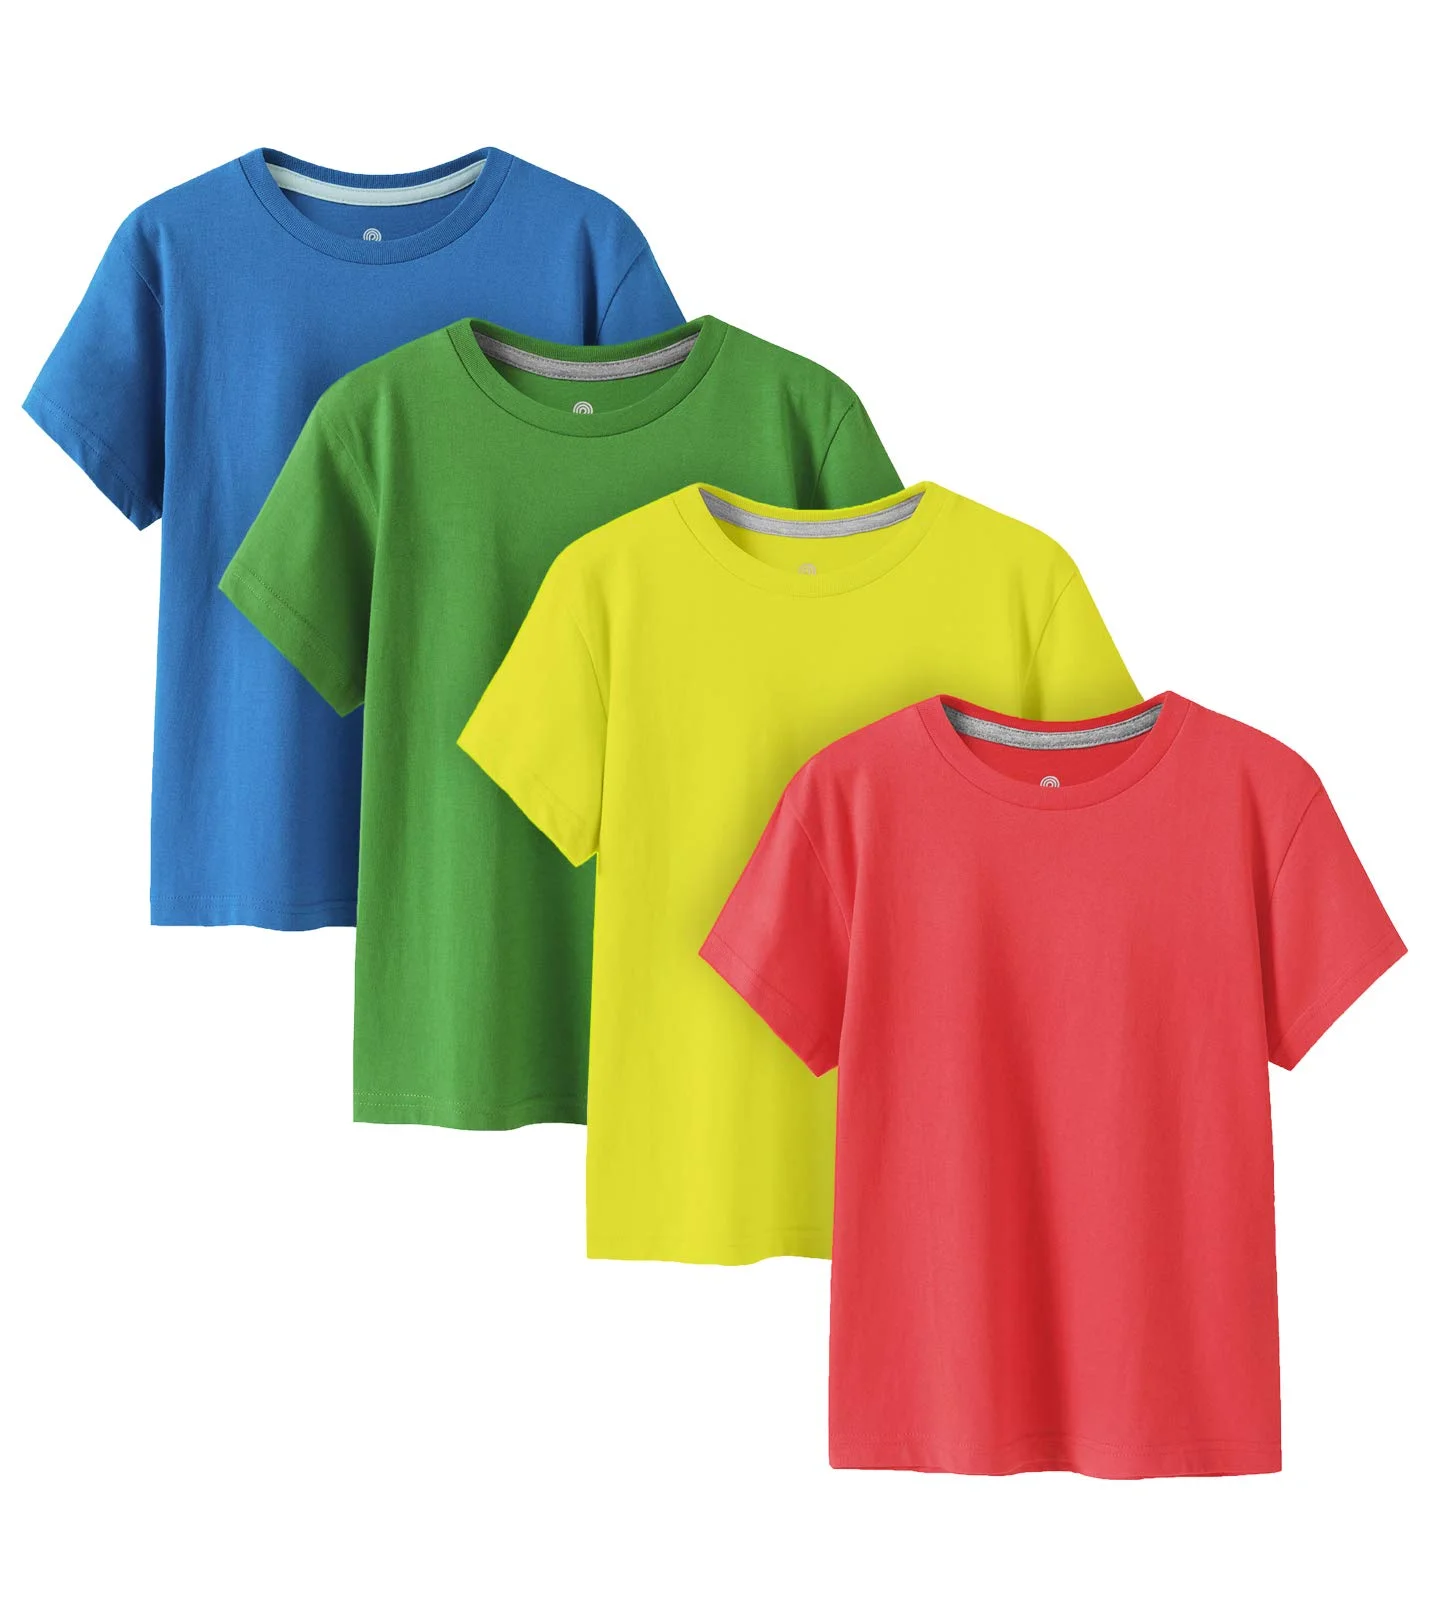 Wholesale T-shirts Indonesia